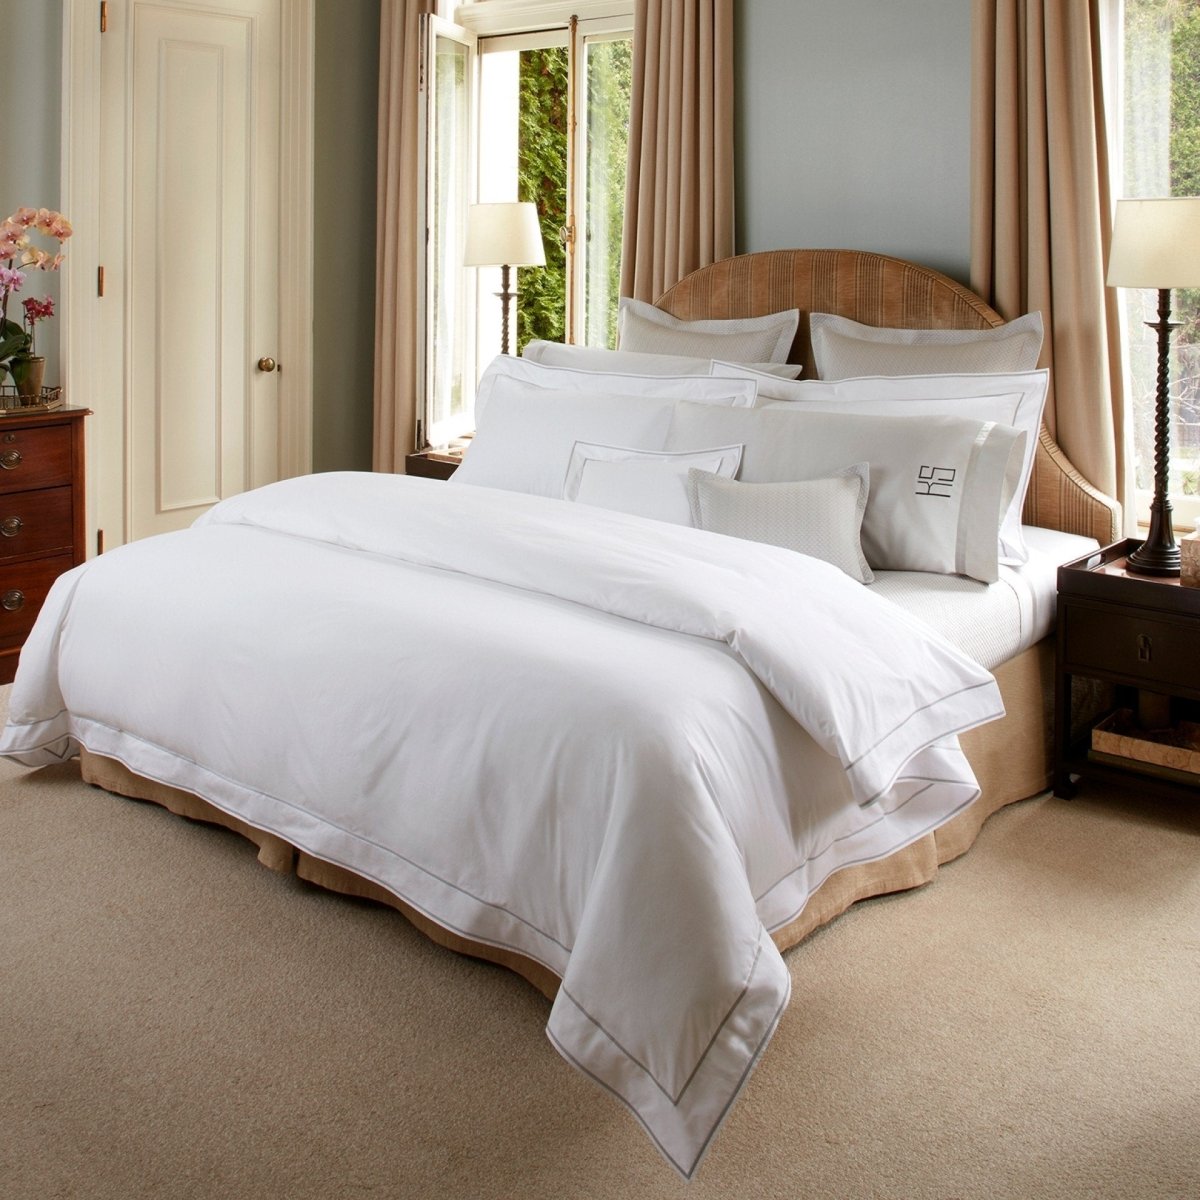 Ansonia Bedding by Matouk - Fig Linens